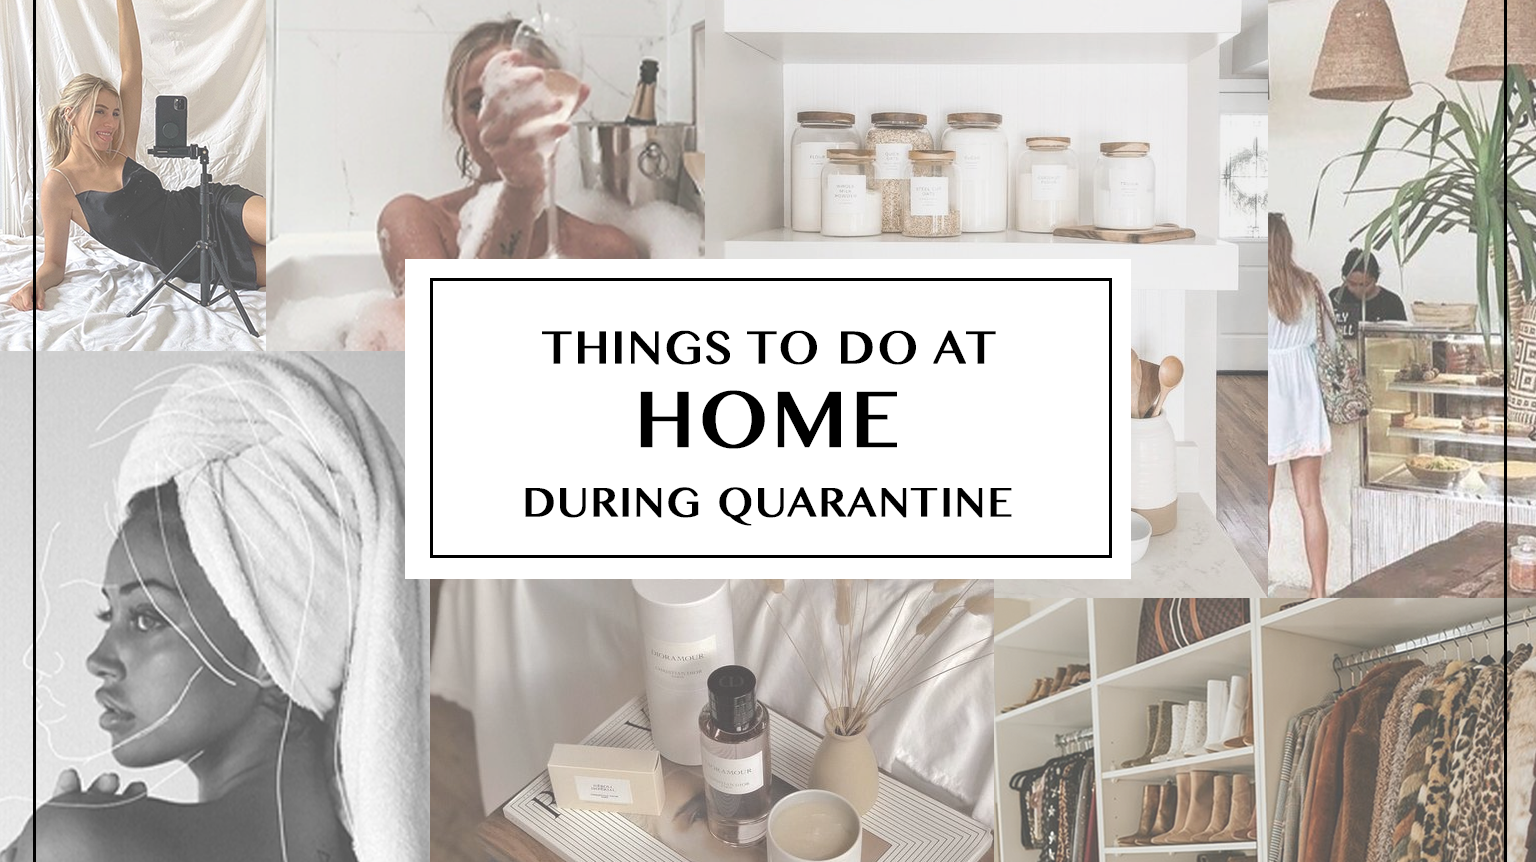 Thing to Do at Home During Quarantine